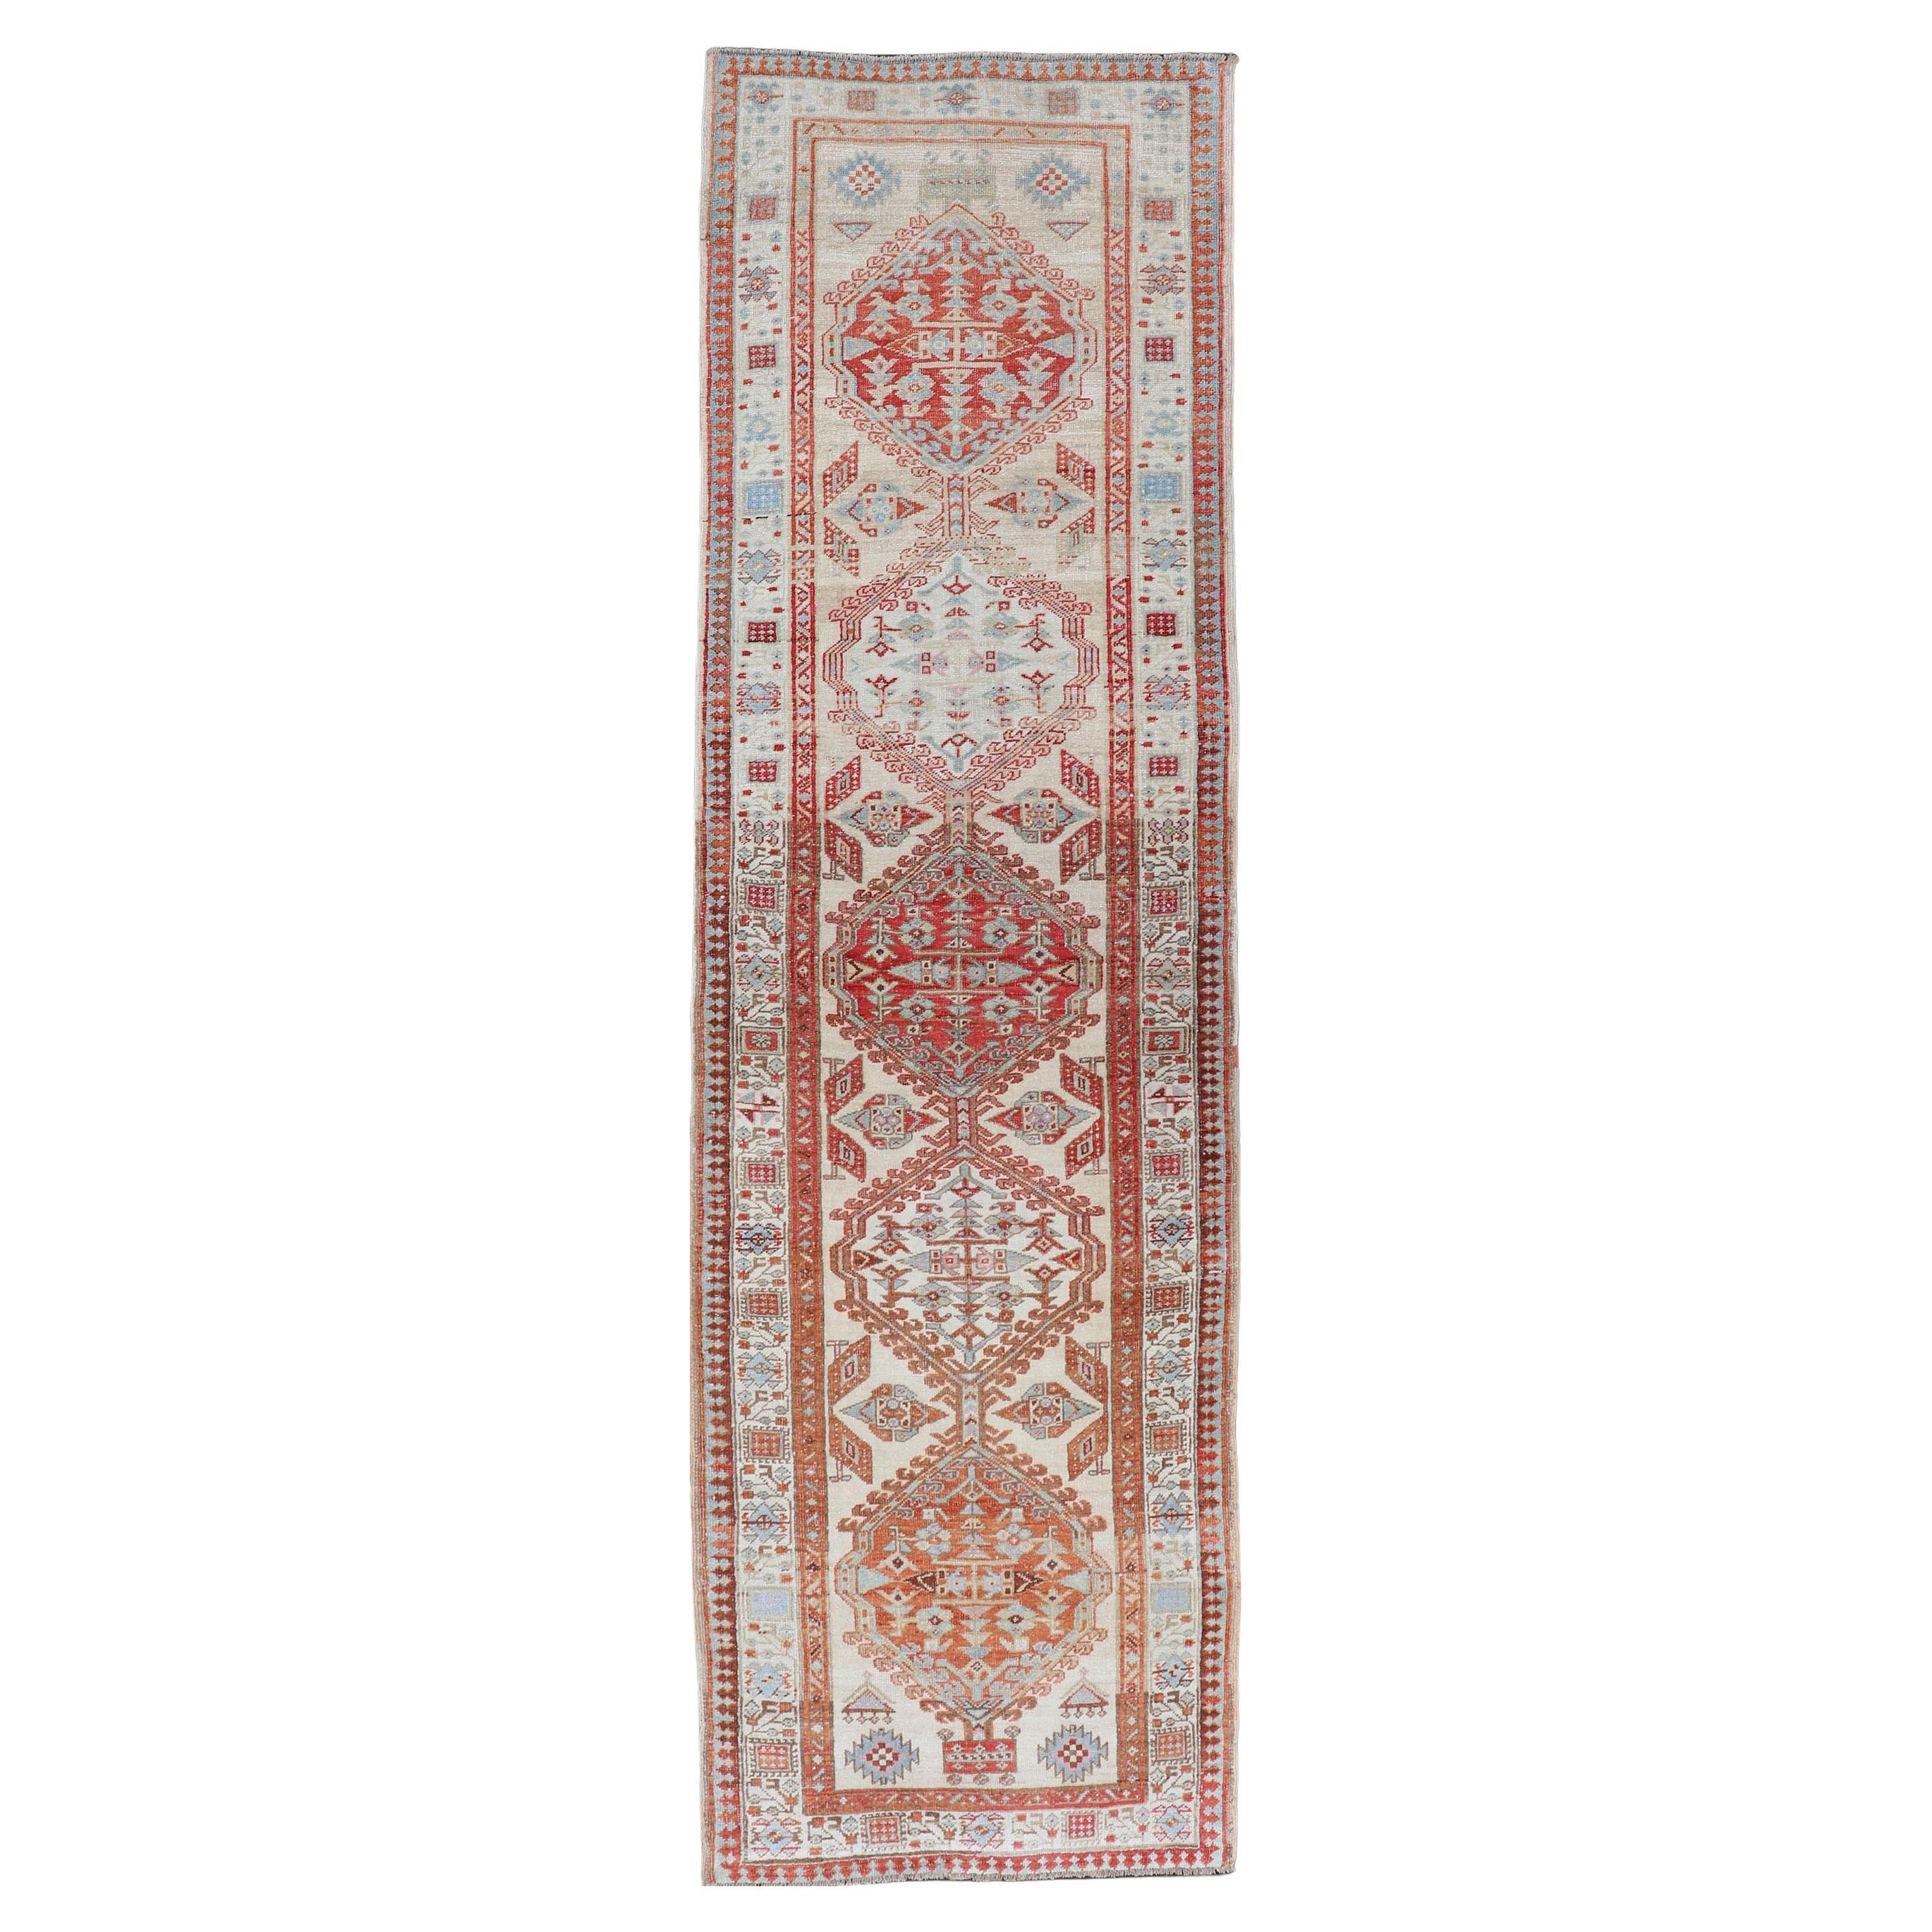 Antique Hand-Knotted Sarab Runner with Sub-Geometric Design in Red, Blue & Ivory